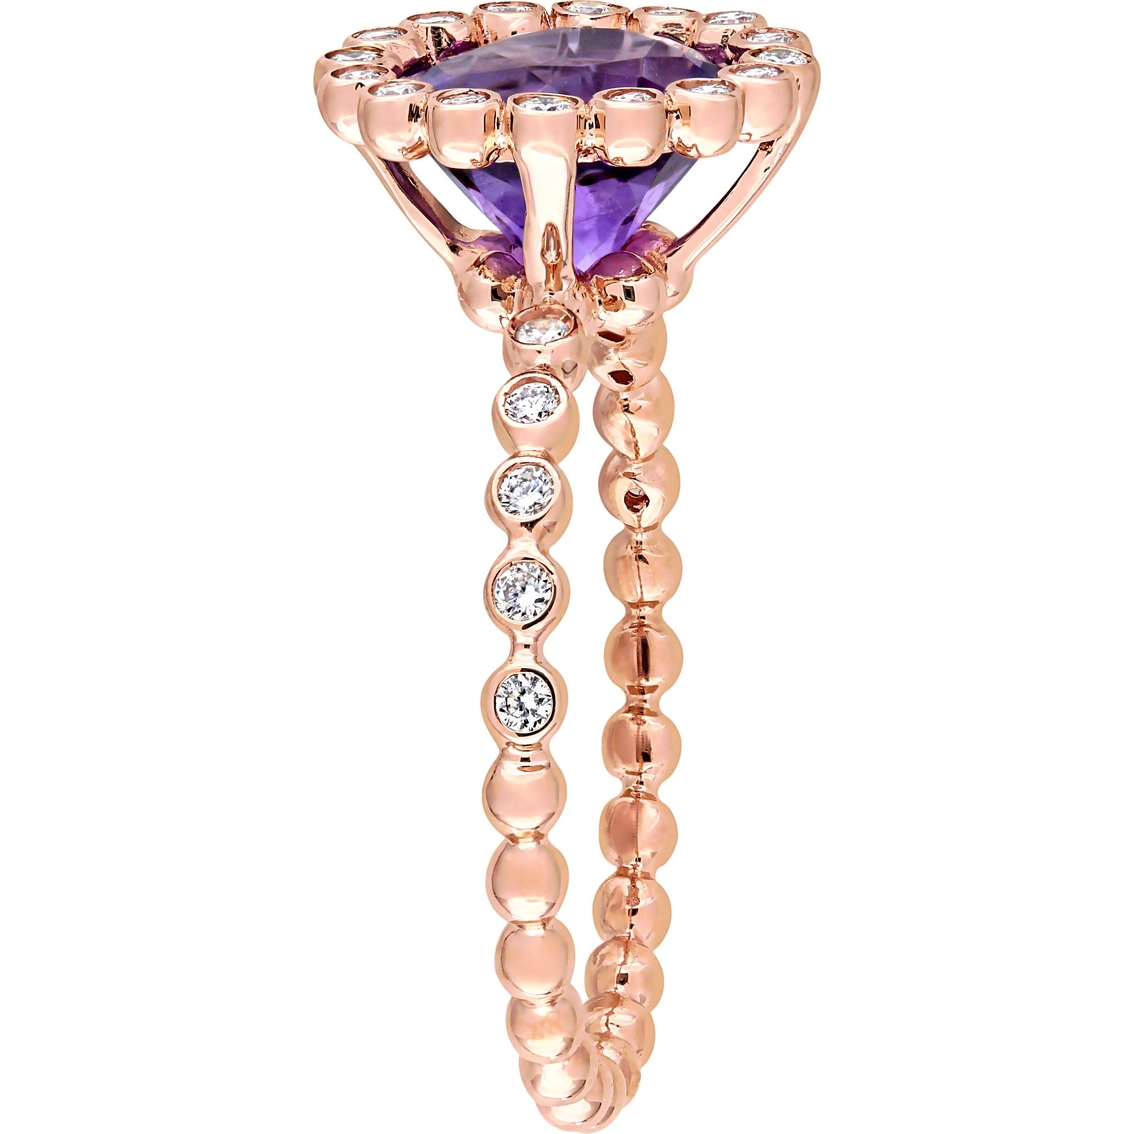 Sofia B. 14K Rose Gold Amethyst and 1/4 CTW Diamond Halo Scalloped Ring - Image 3 of 4